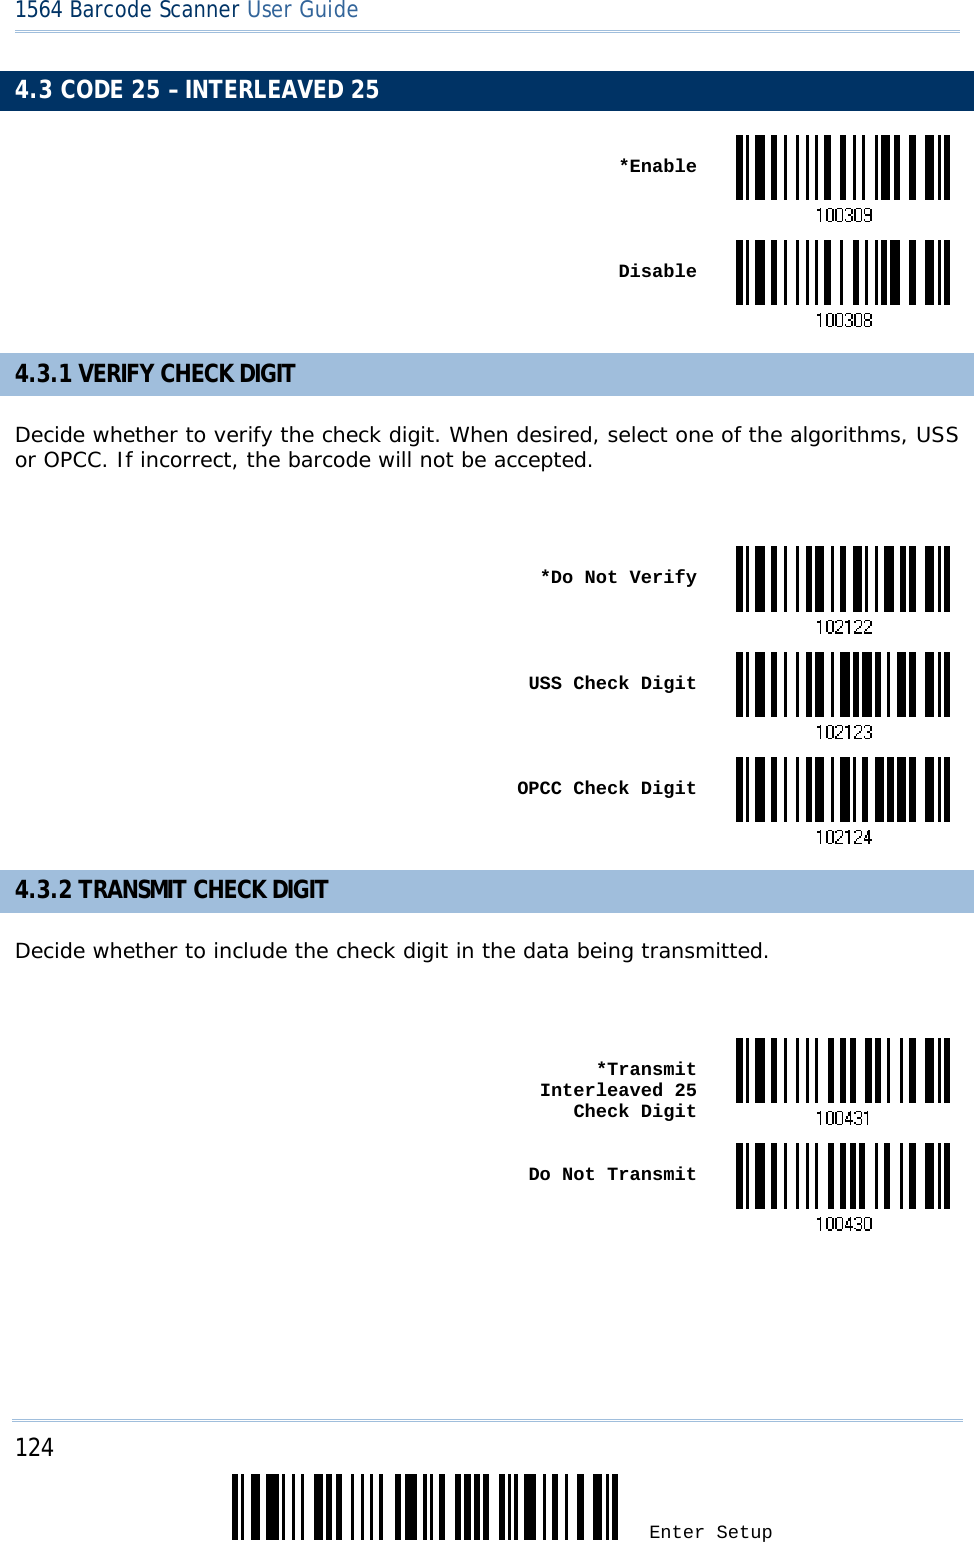 124 Enter Setup 1564 Barcode Scanner User Guide  4.3 CODE 25 – INTERLEAVED 25  *Enable Disable4.3.1 VERIFY CHECK DIGIT Decide whether to verify the check digit. When desired, select one of the algorithms, USS or OPCC. If incorrect, the barcode will not be accepted.   *Do Not Verify USS Check Digit OPCC Check Digit4.3.2 TRANSMIT CHECK DIGIT Decide whether to include the check digit in the data being transmitted.   *Transmit Interleaved 25  Check Digit Do Not Transmit     